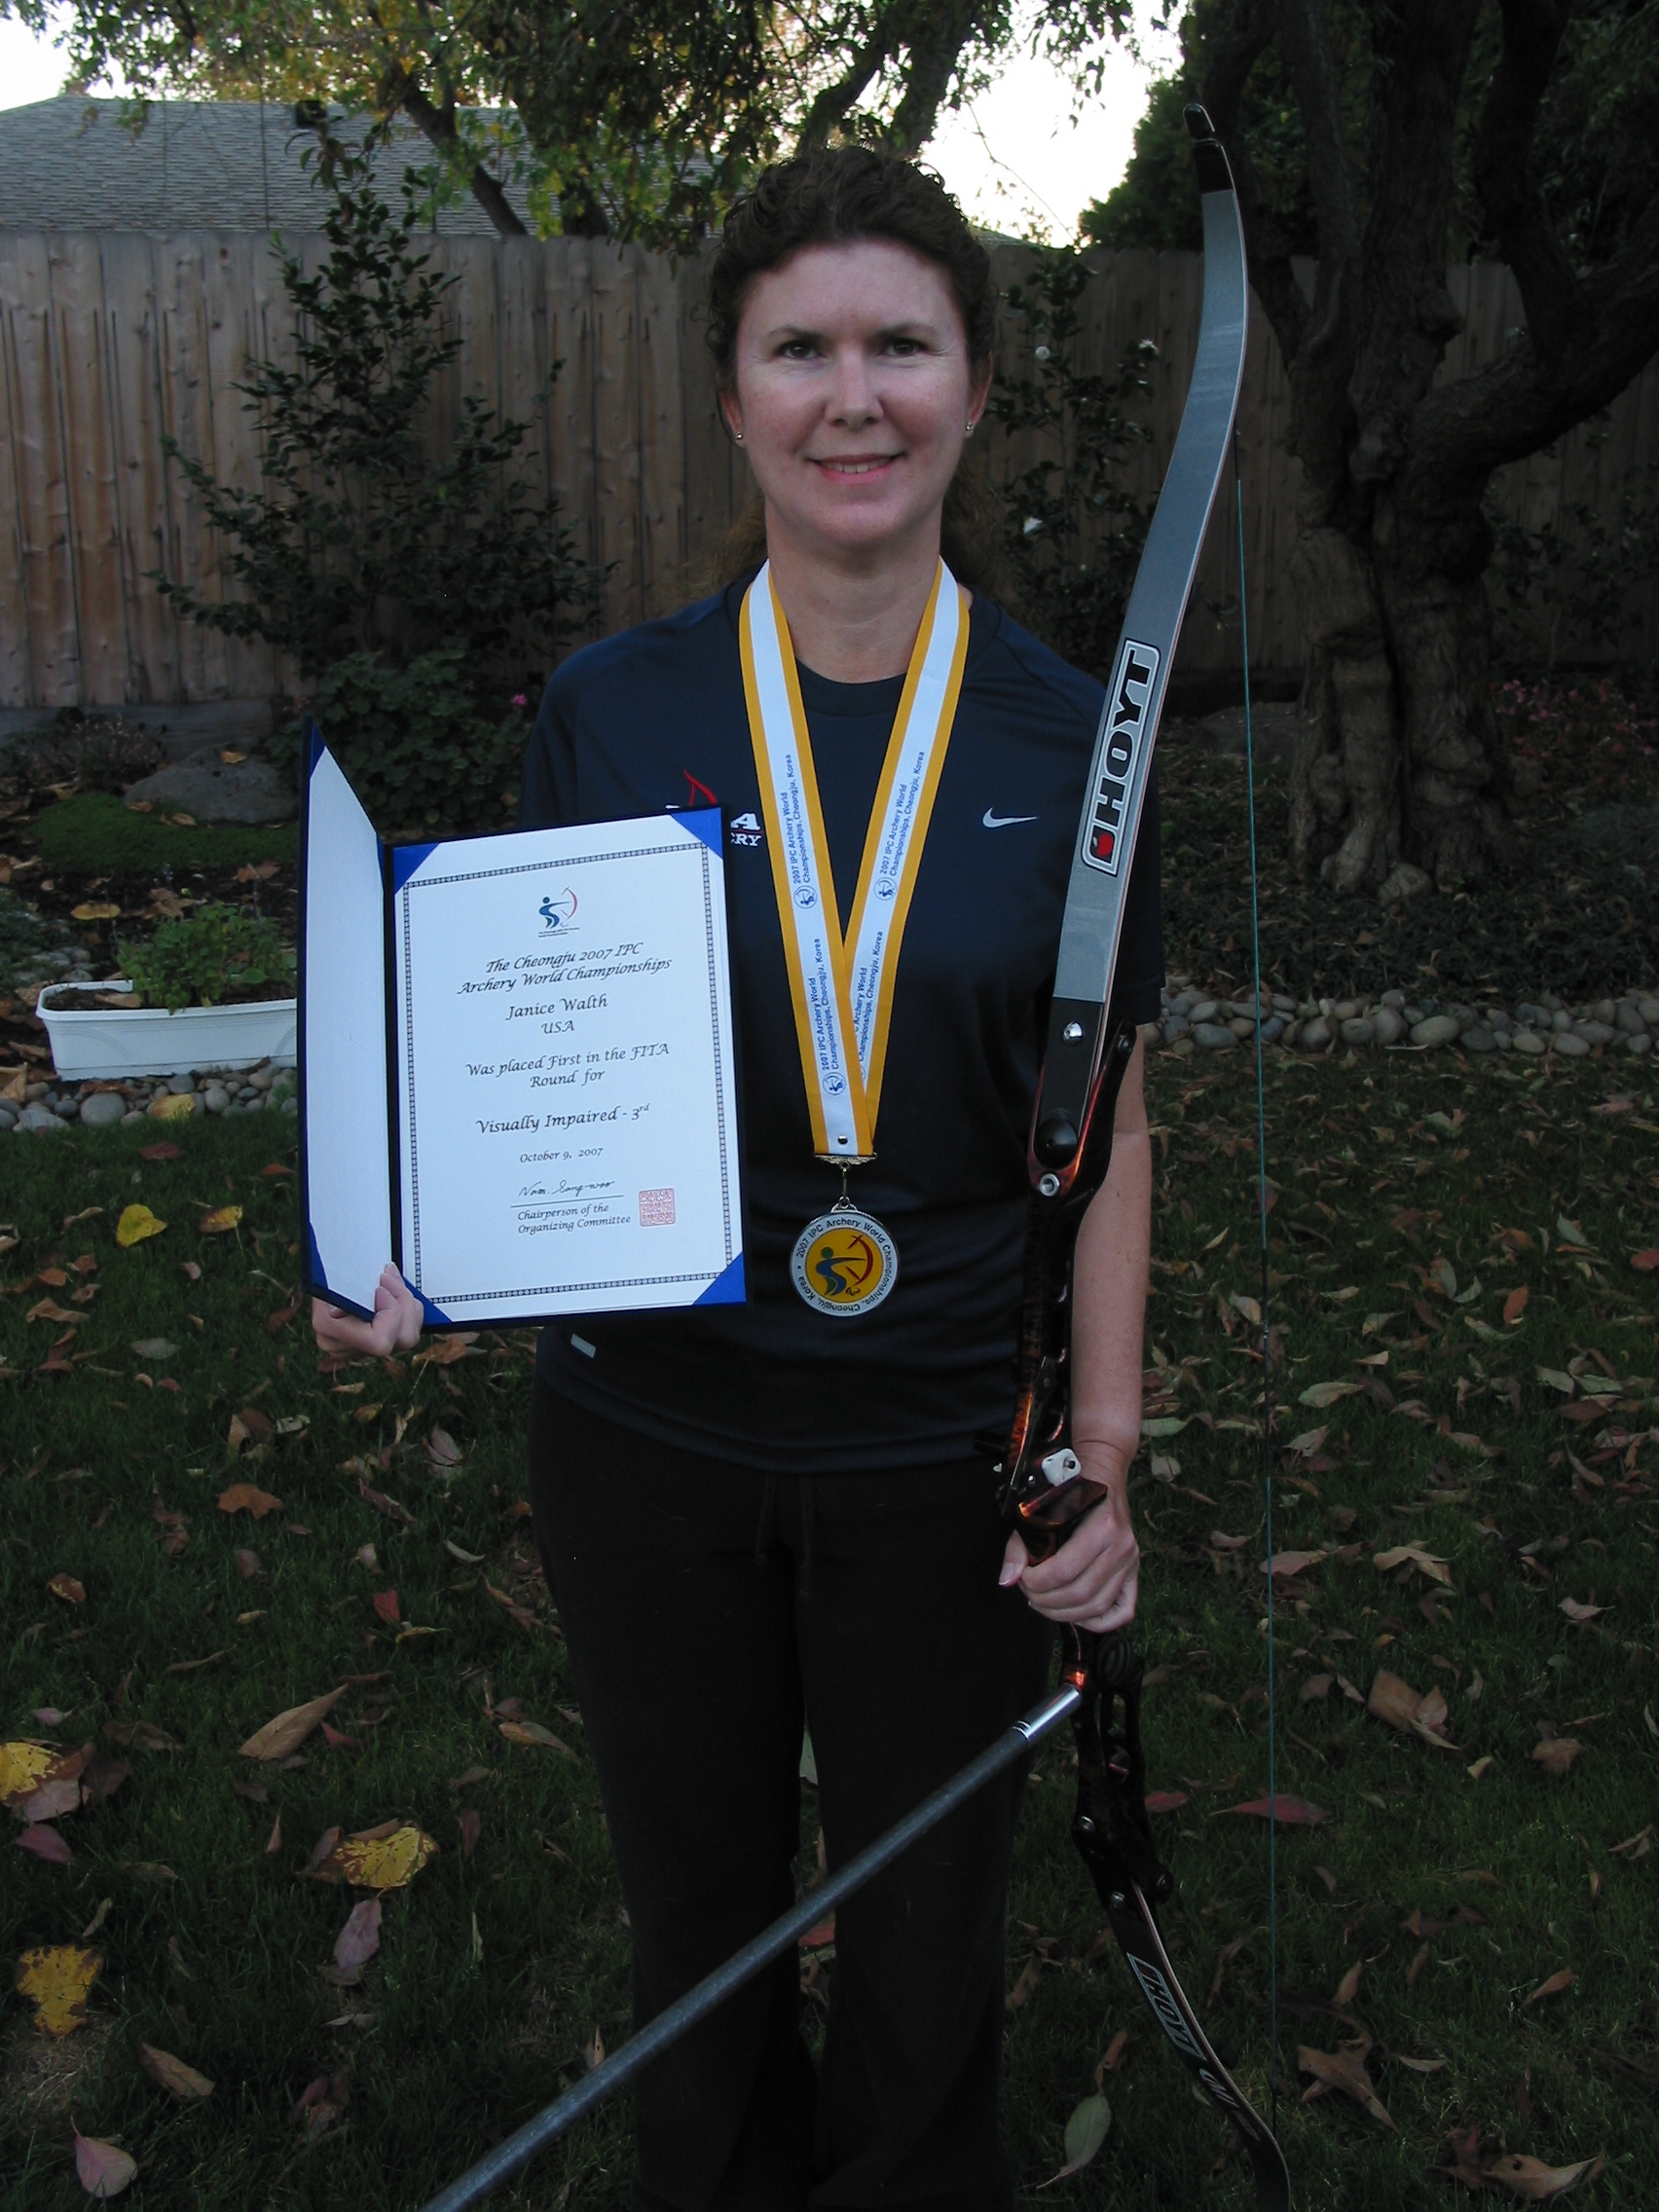 Janice Standing with silver medal around her neck. Her Hoyt bow is in her left hand and her award for the qualifier round is in her right hand